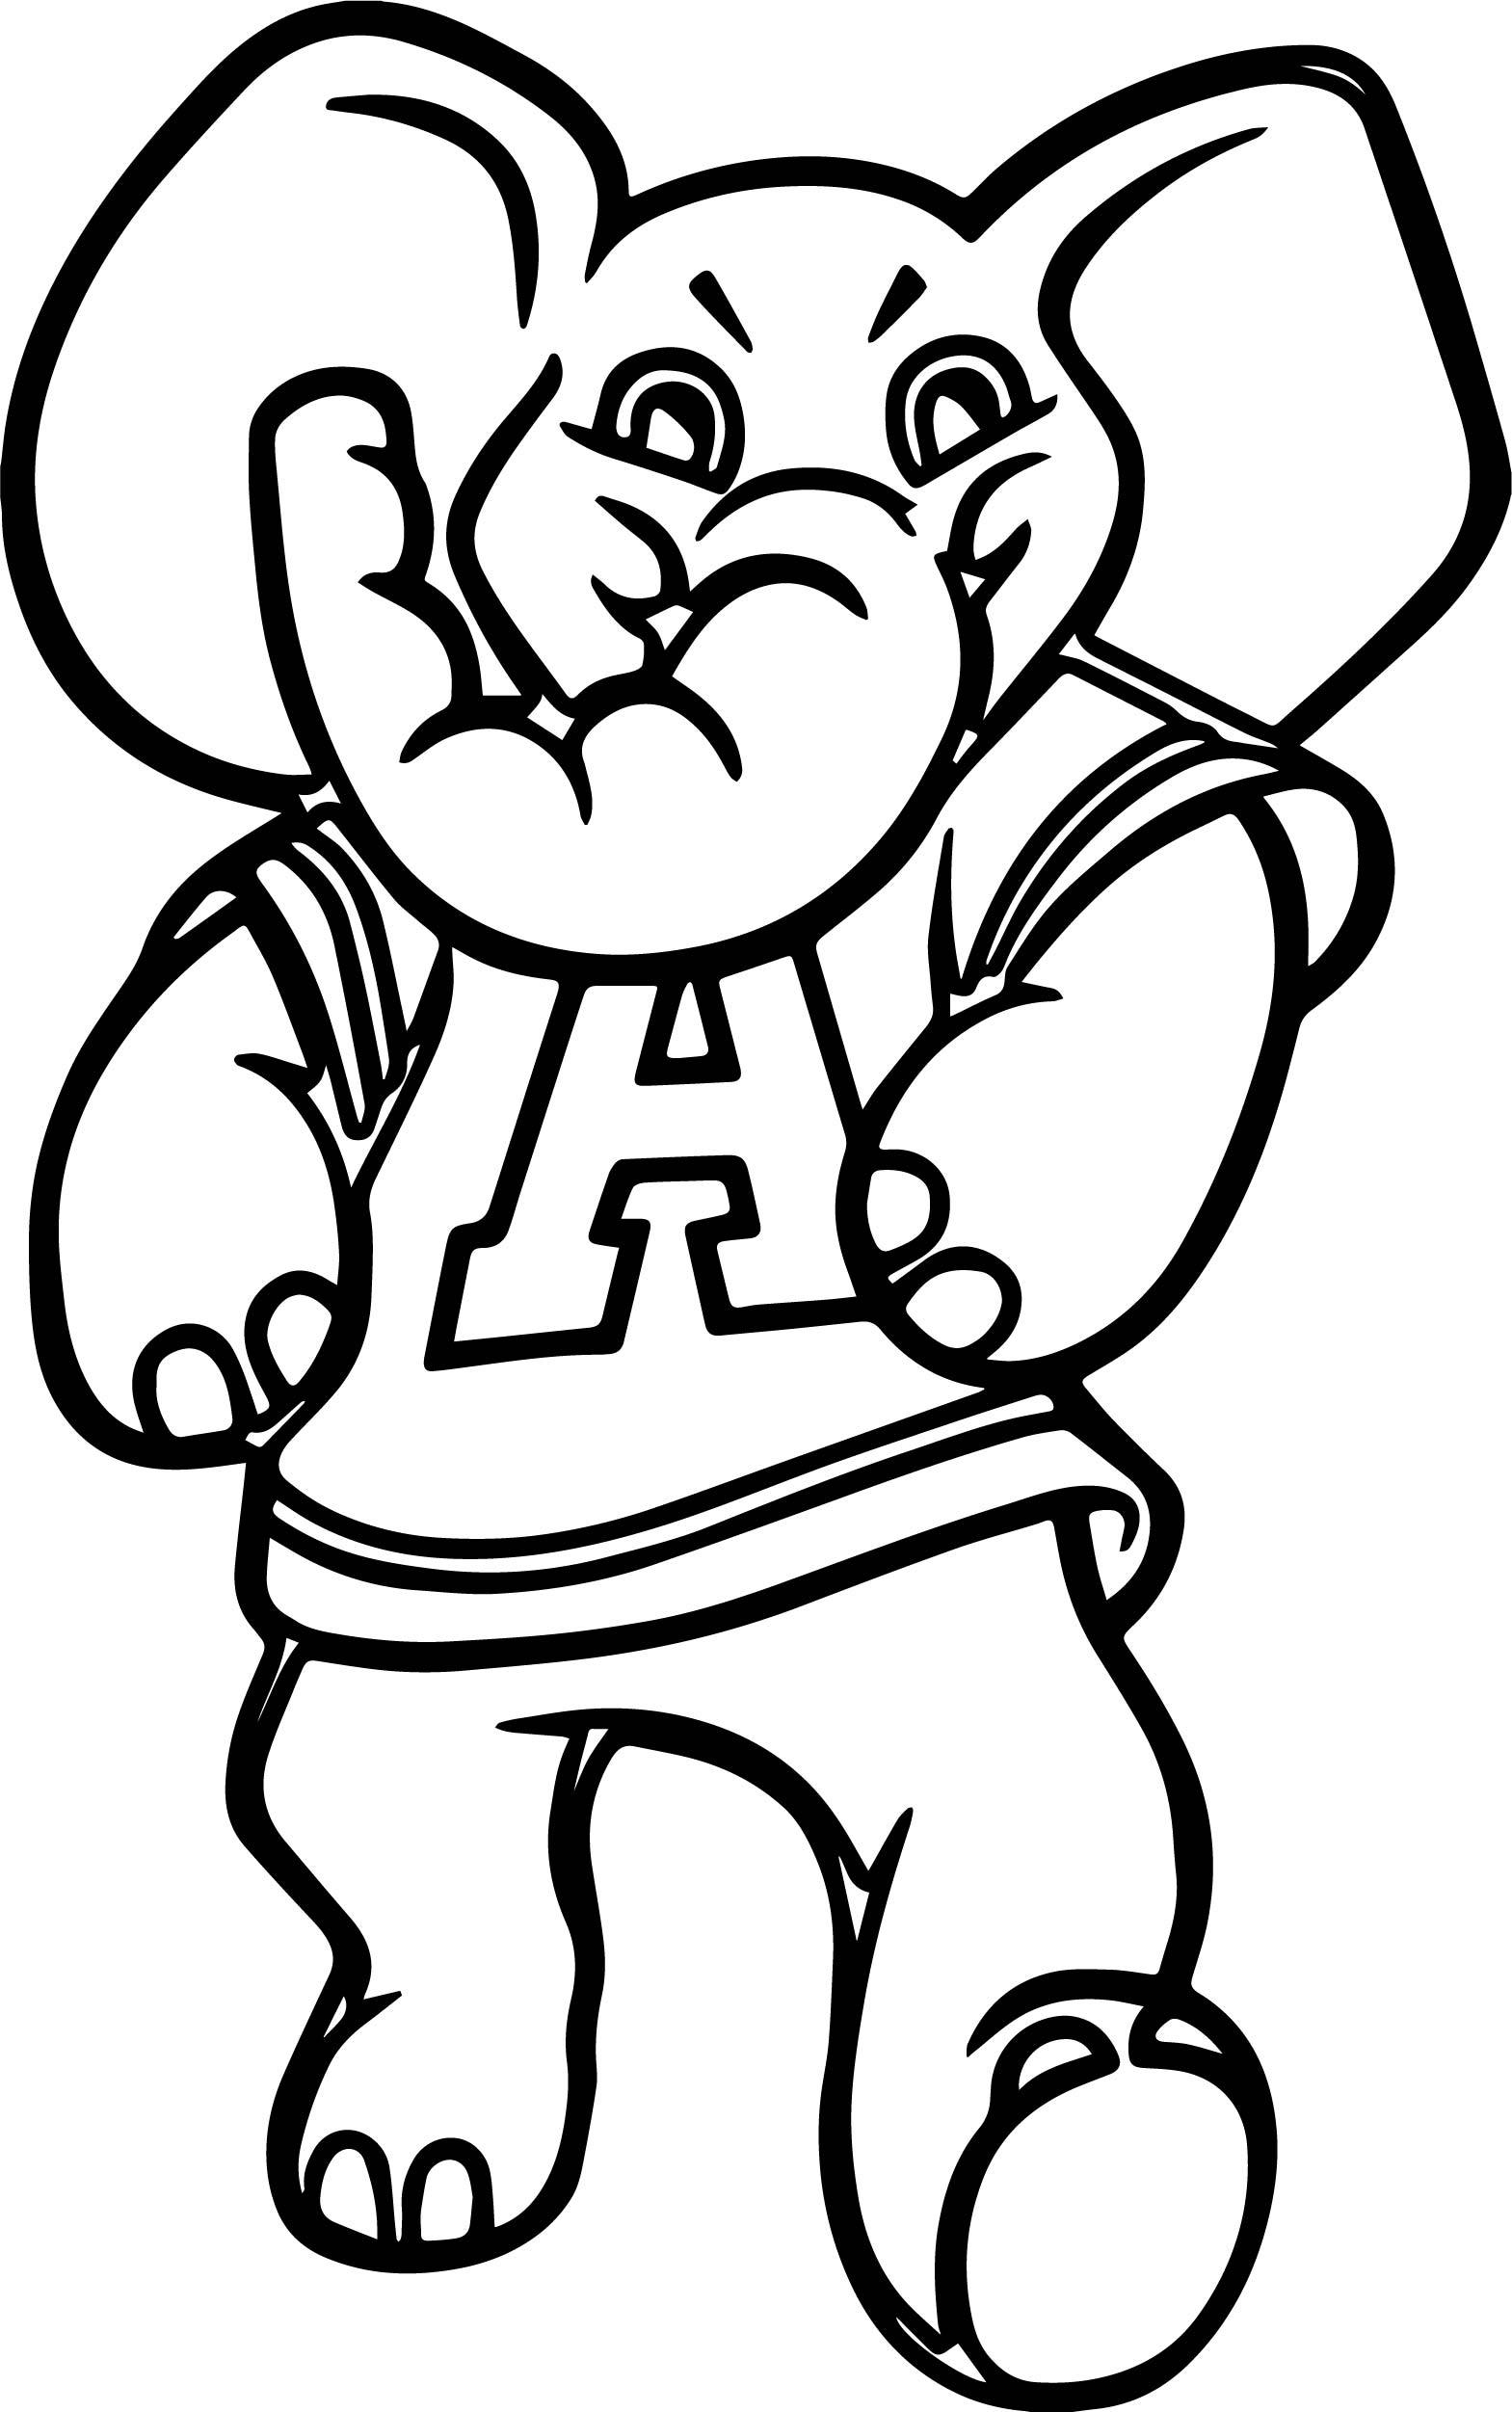 Alabama Coloring Pages Football at GetDrawings.com | Free for personal